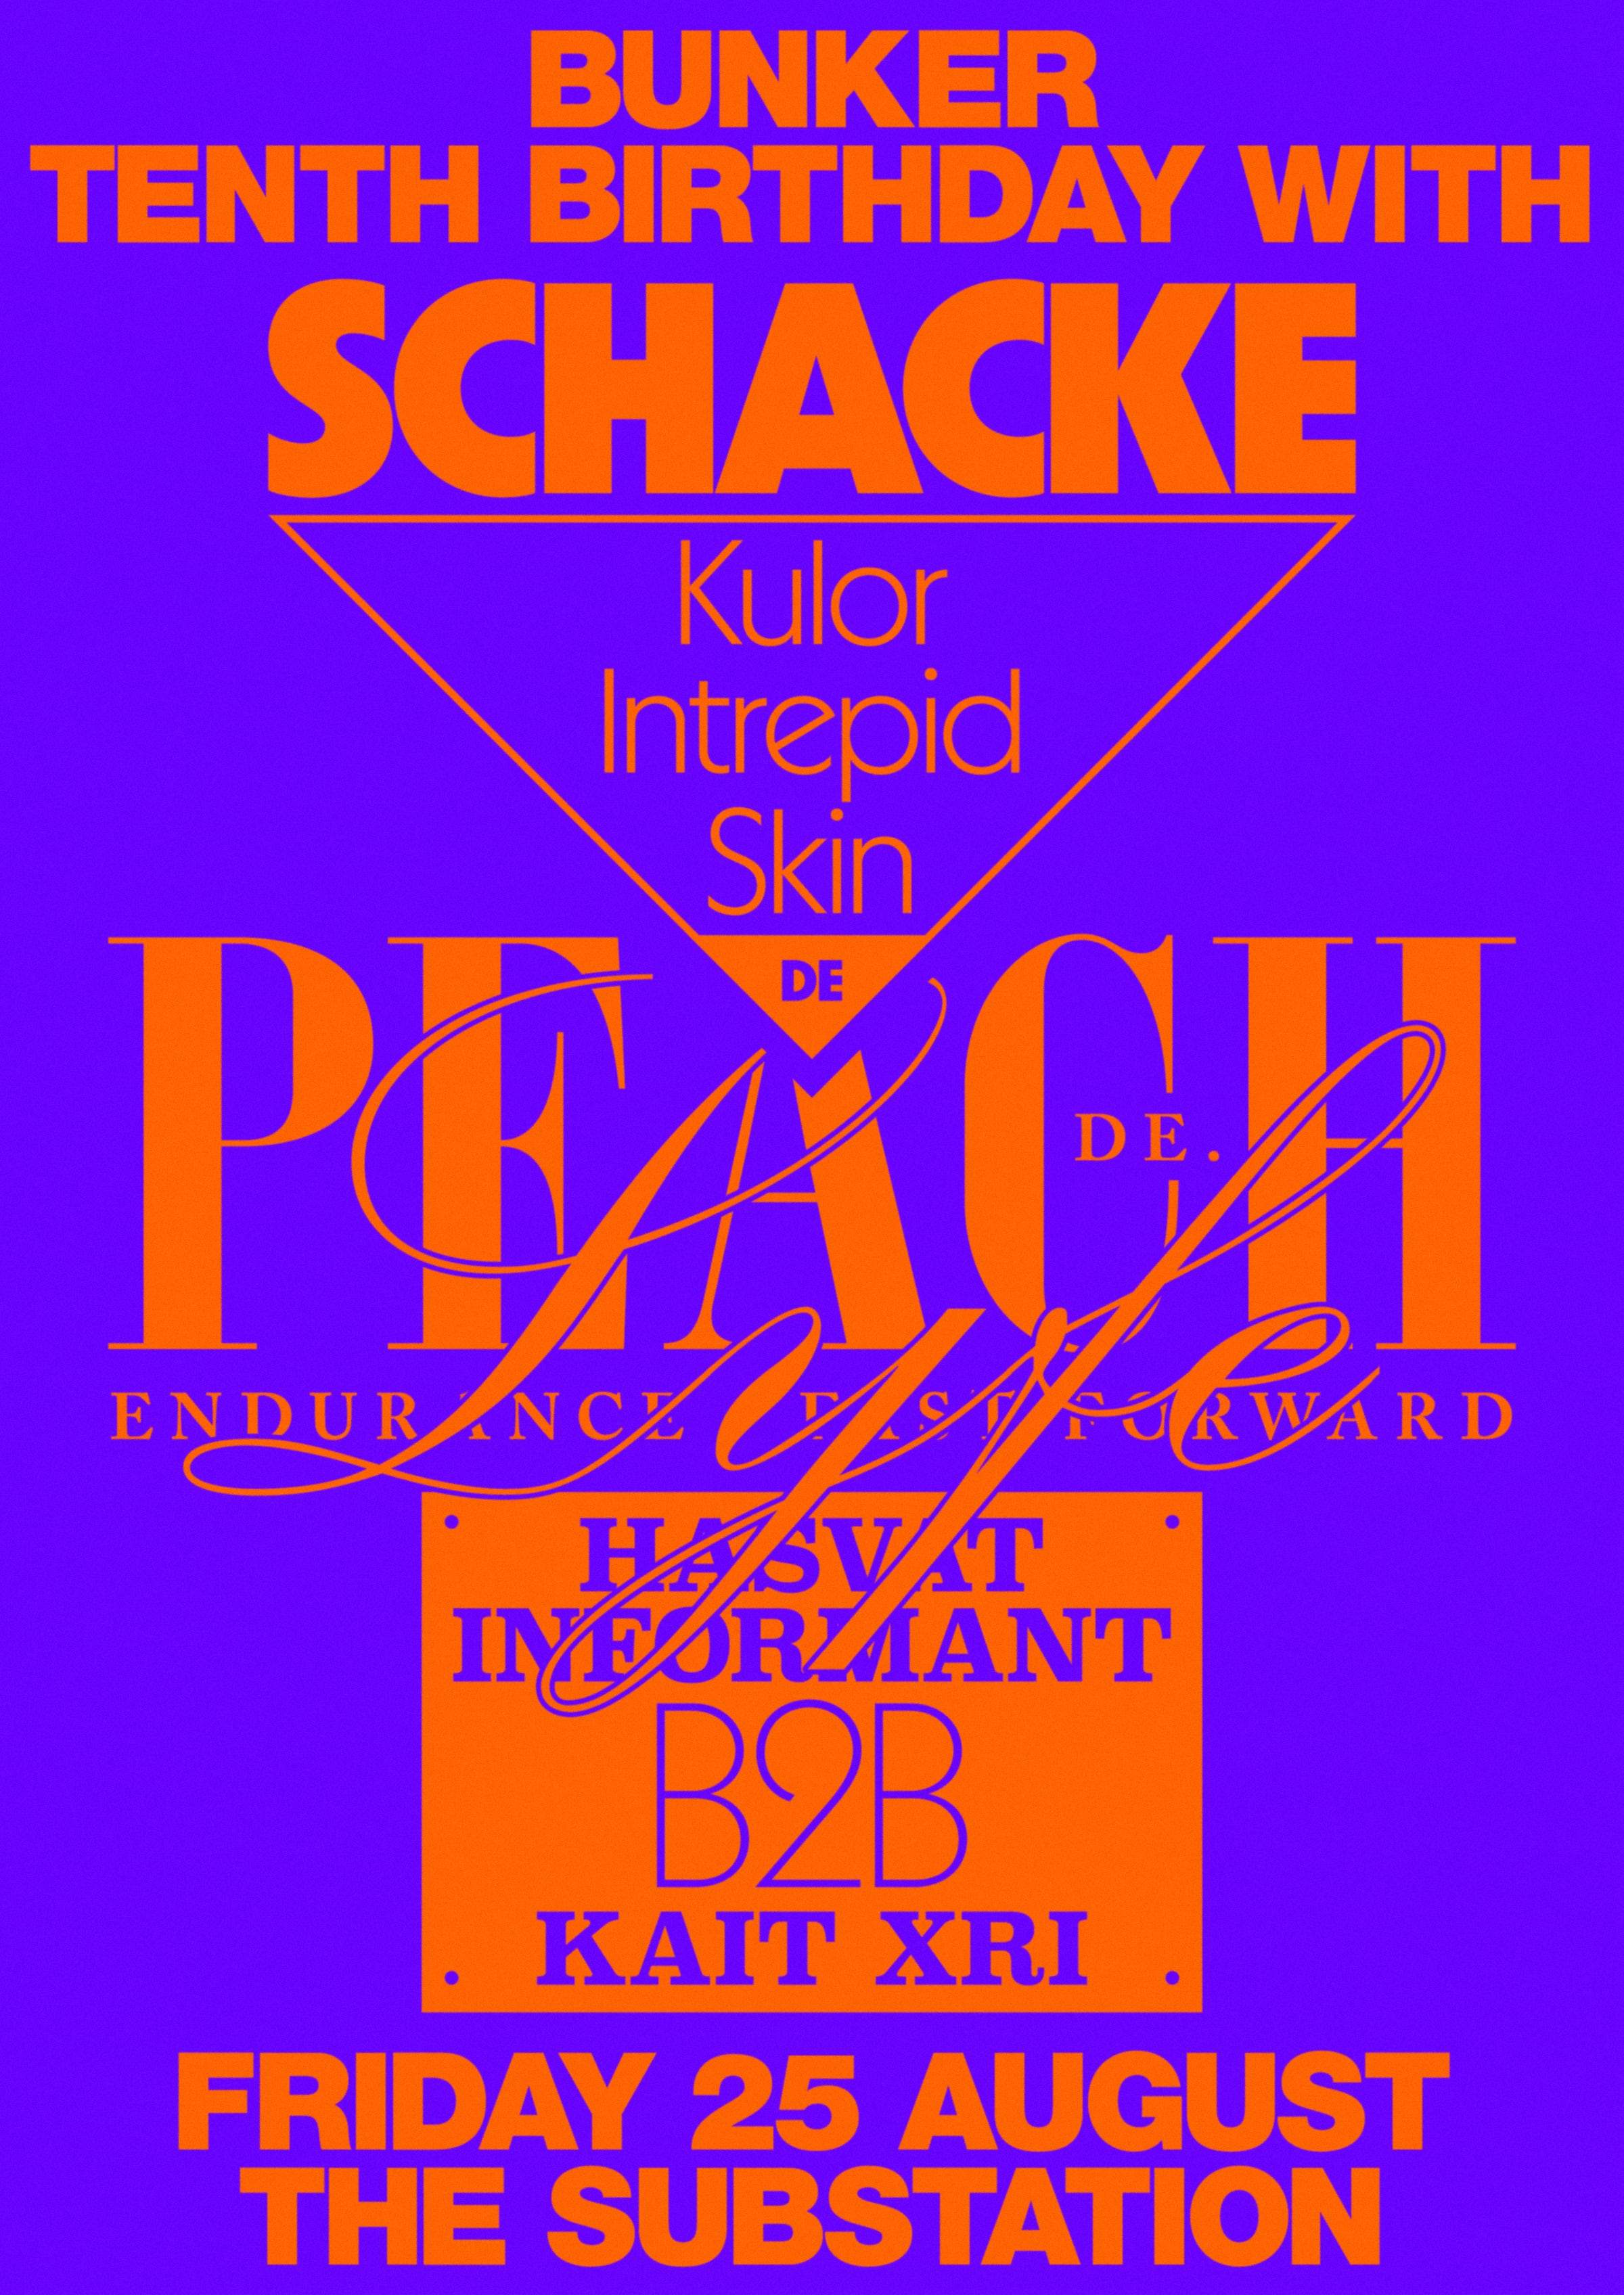 Bunkers 10th Birthday with Schacke and Peachlyfe - フライヤー表